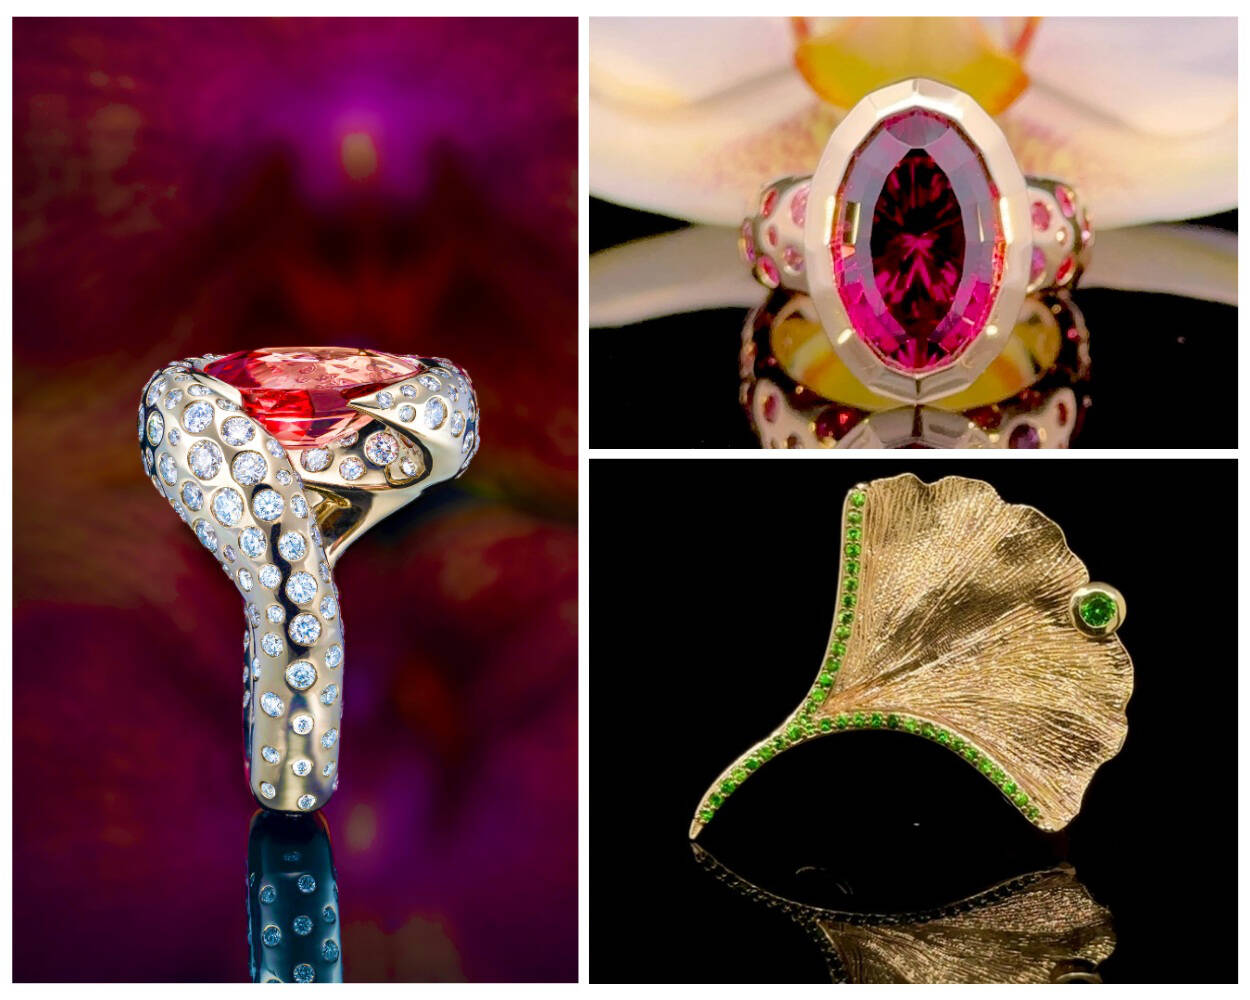 From left to right - ‘Octavia’ (far left) ft. a 6.7 ct. Dragon garnet and diamonds, ‘Scarlet’ (top right) ft. rubies, sapphires, Rhodalite garnets, and amethyst, ‘Gingko leaf’ (bottom right) ft. Tsavorite garnets.